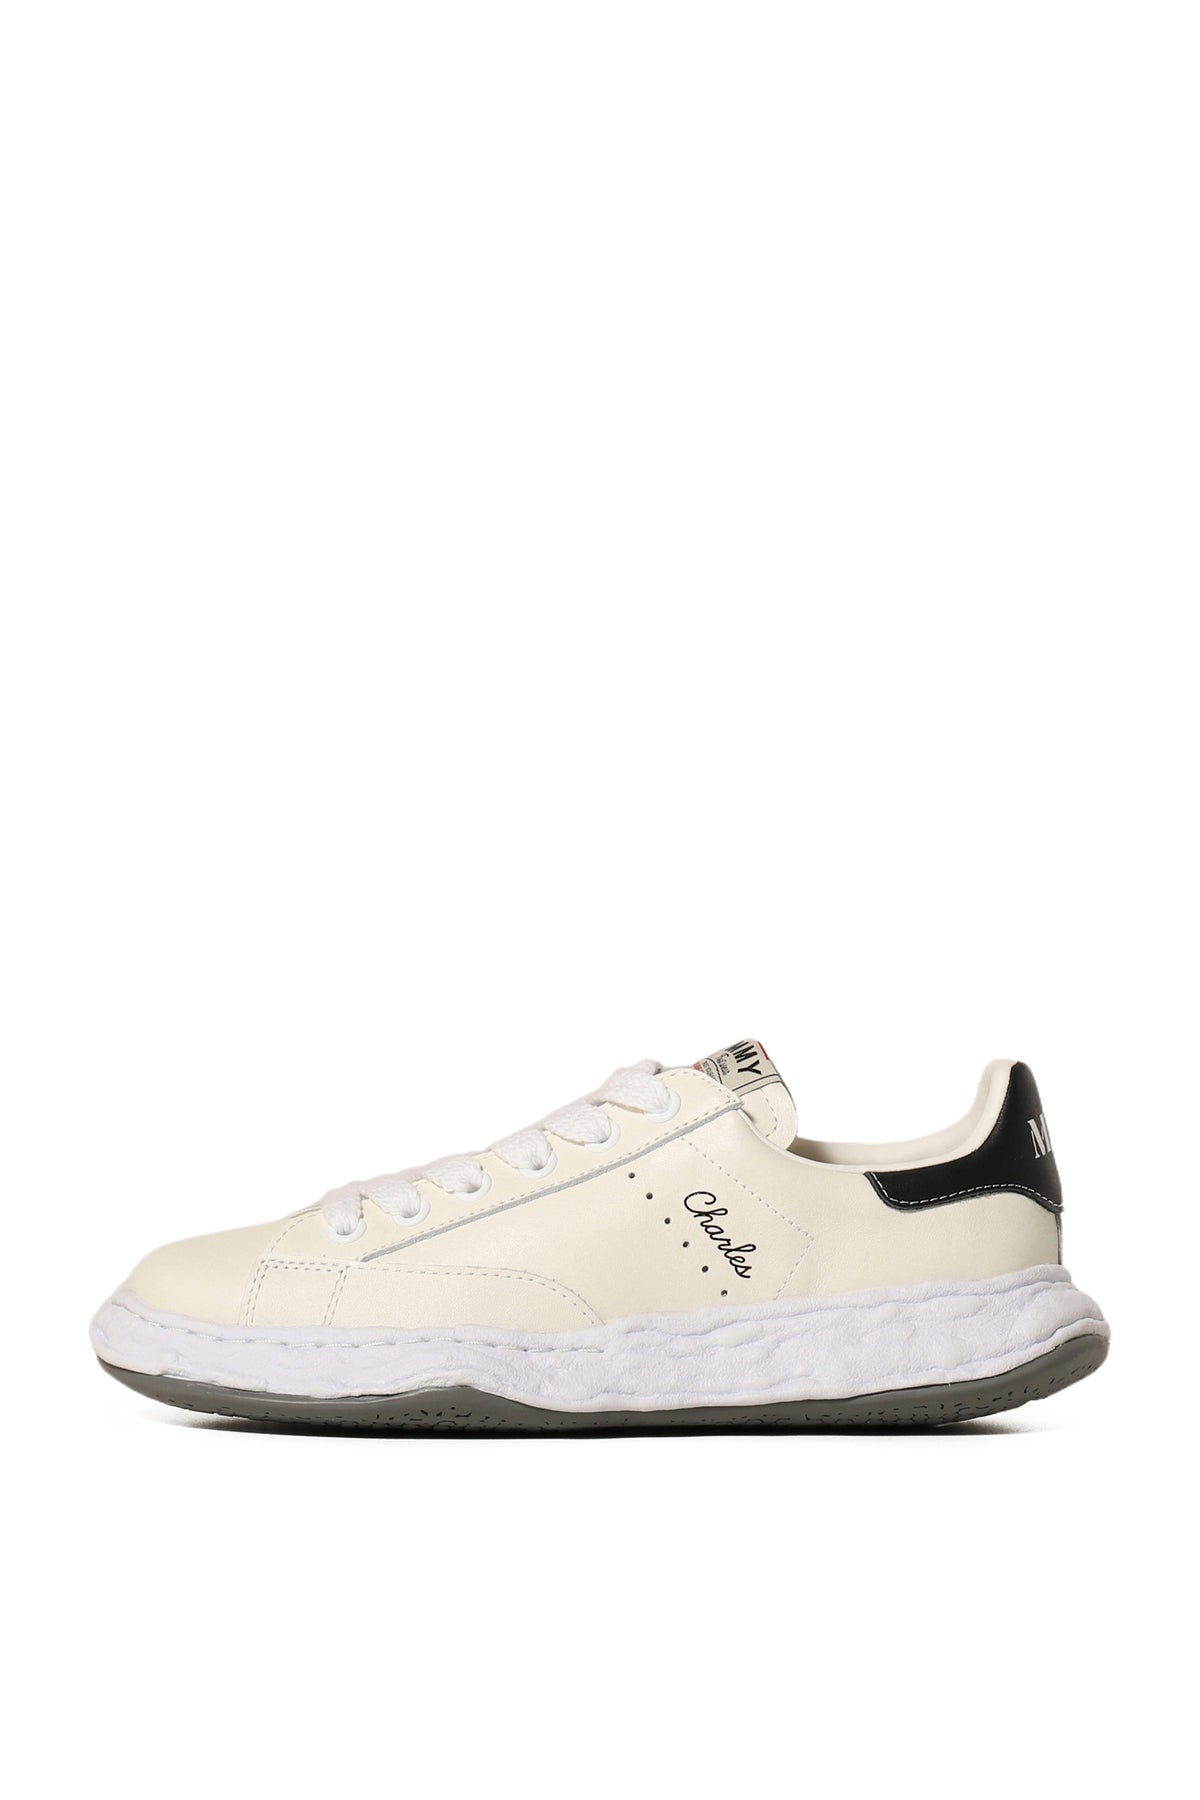 CHARLES LOW LEATHER / WHT